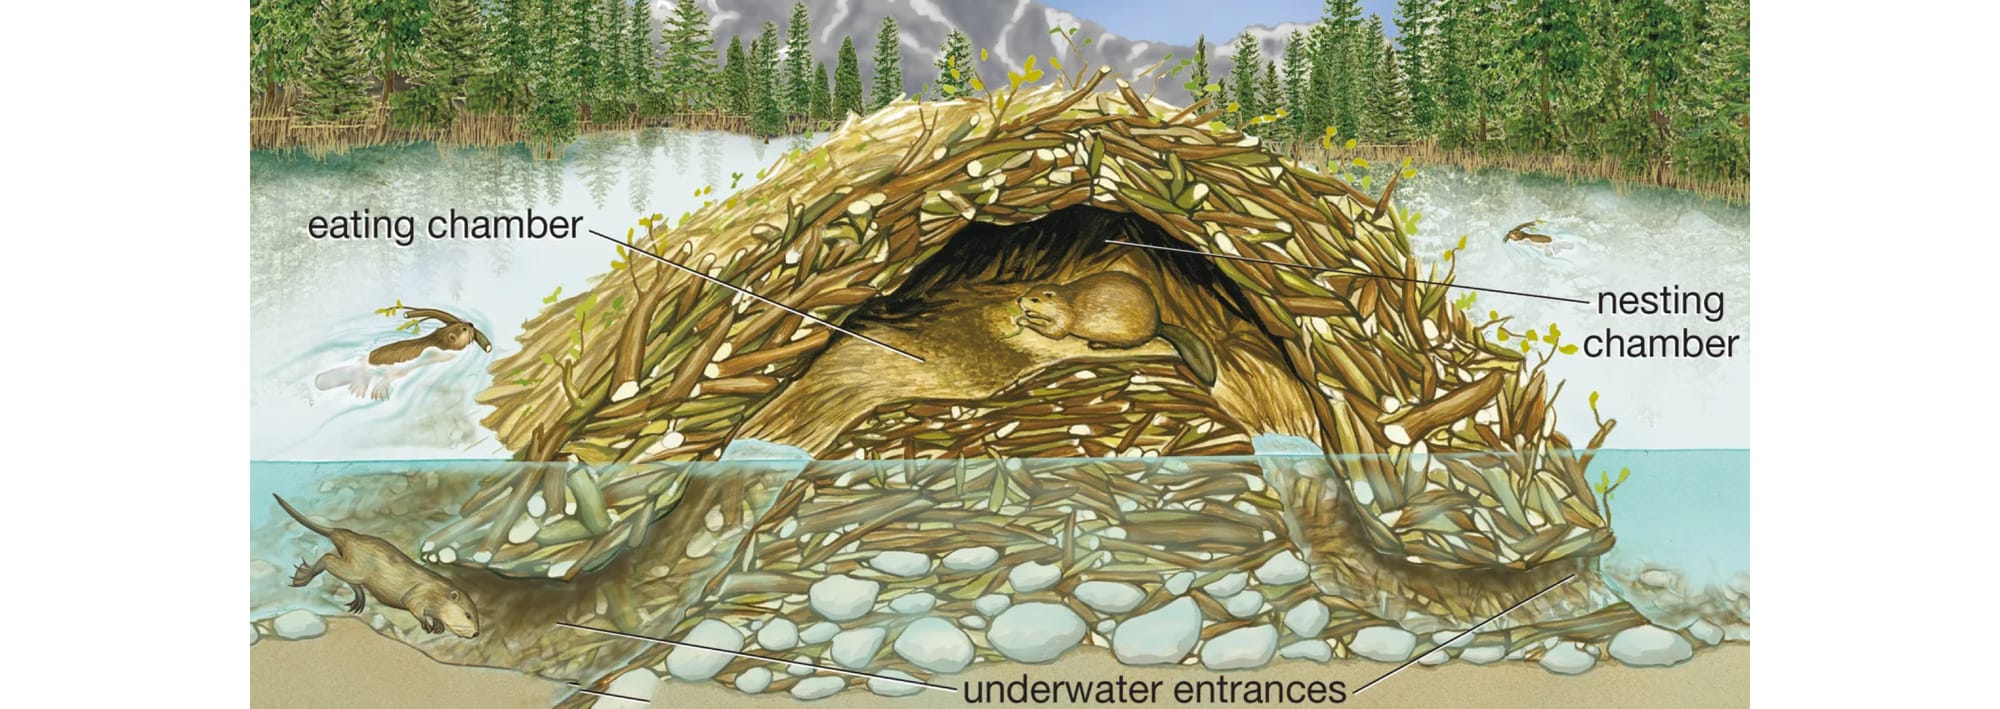 Illustration of typical beaver lodge with eating and nesting chambers above water and underwater entrances